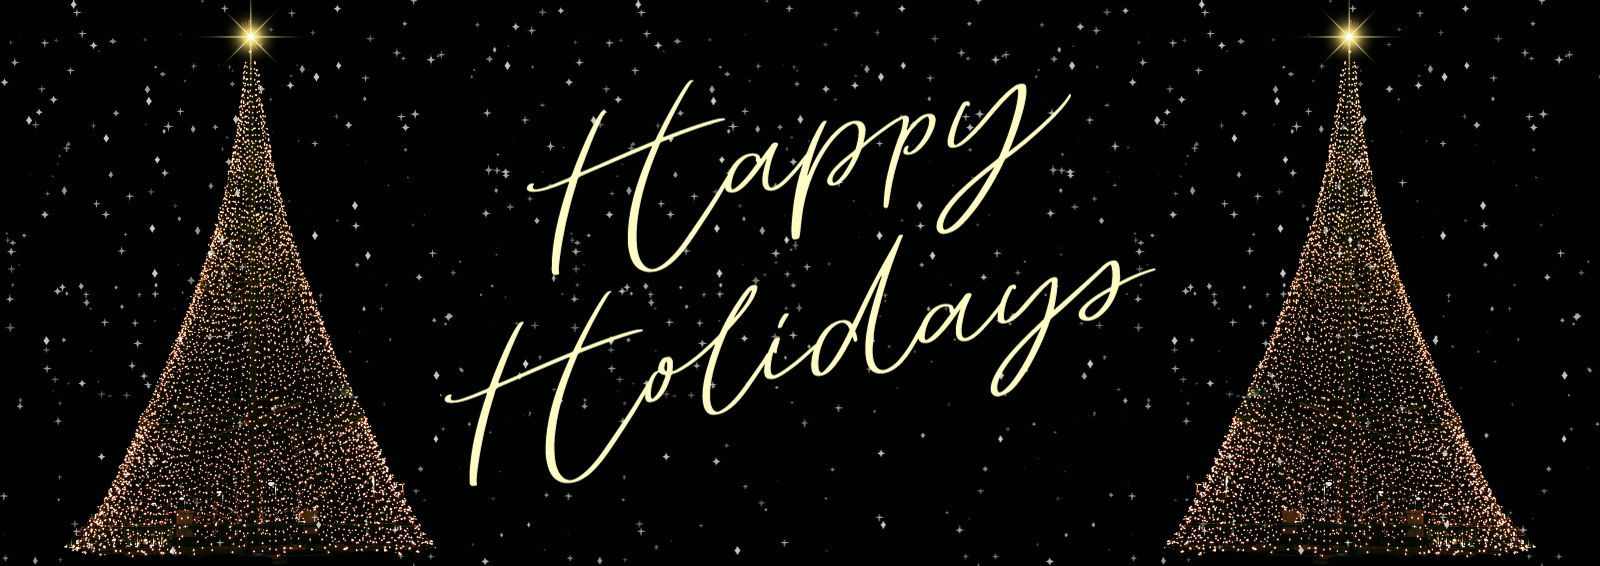 Graphic of Twinkling lights shaped like two Christmas trees with text that says Happy Holidays